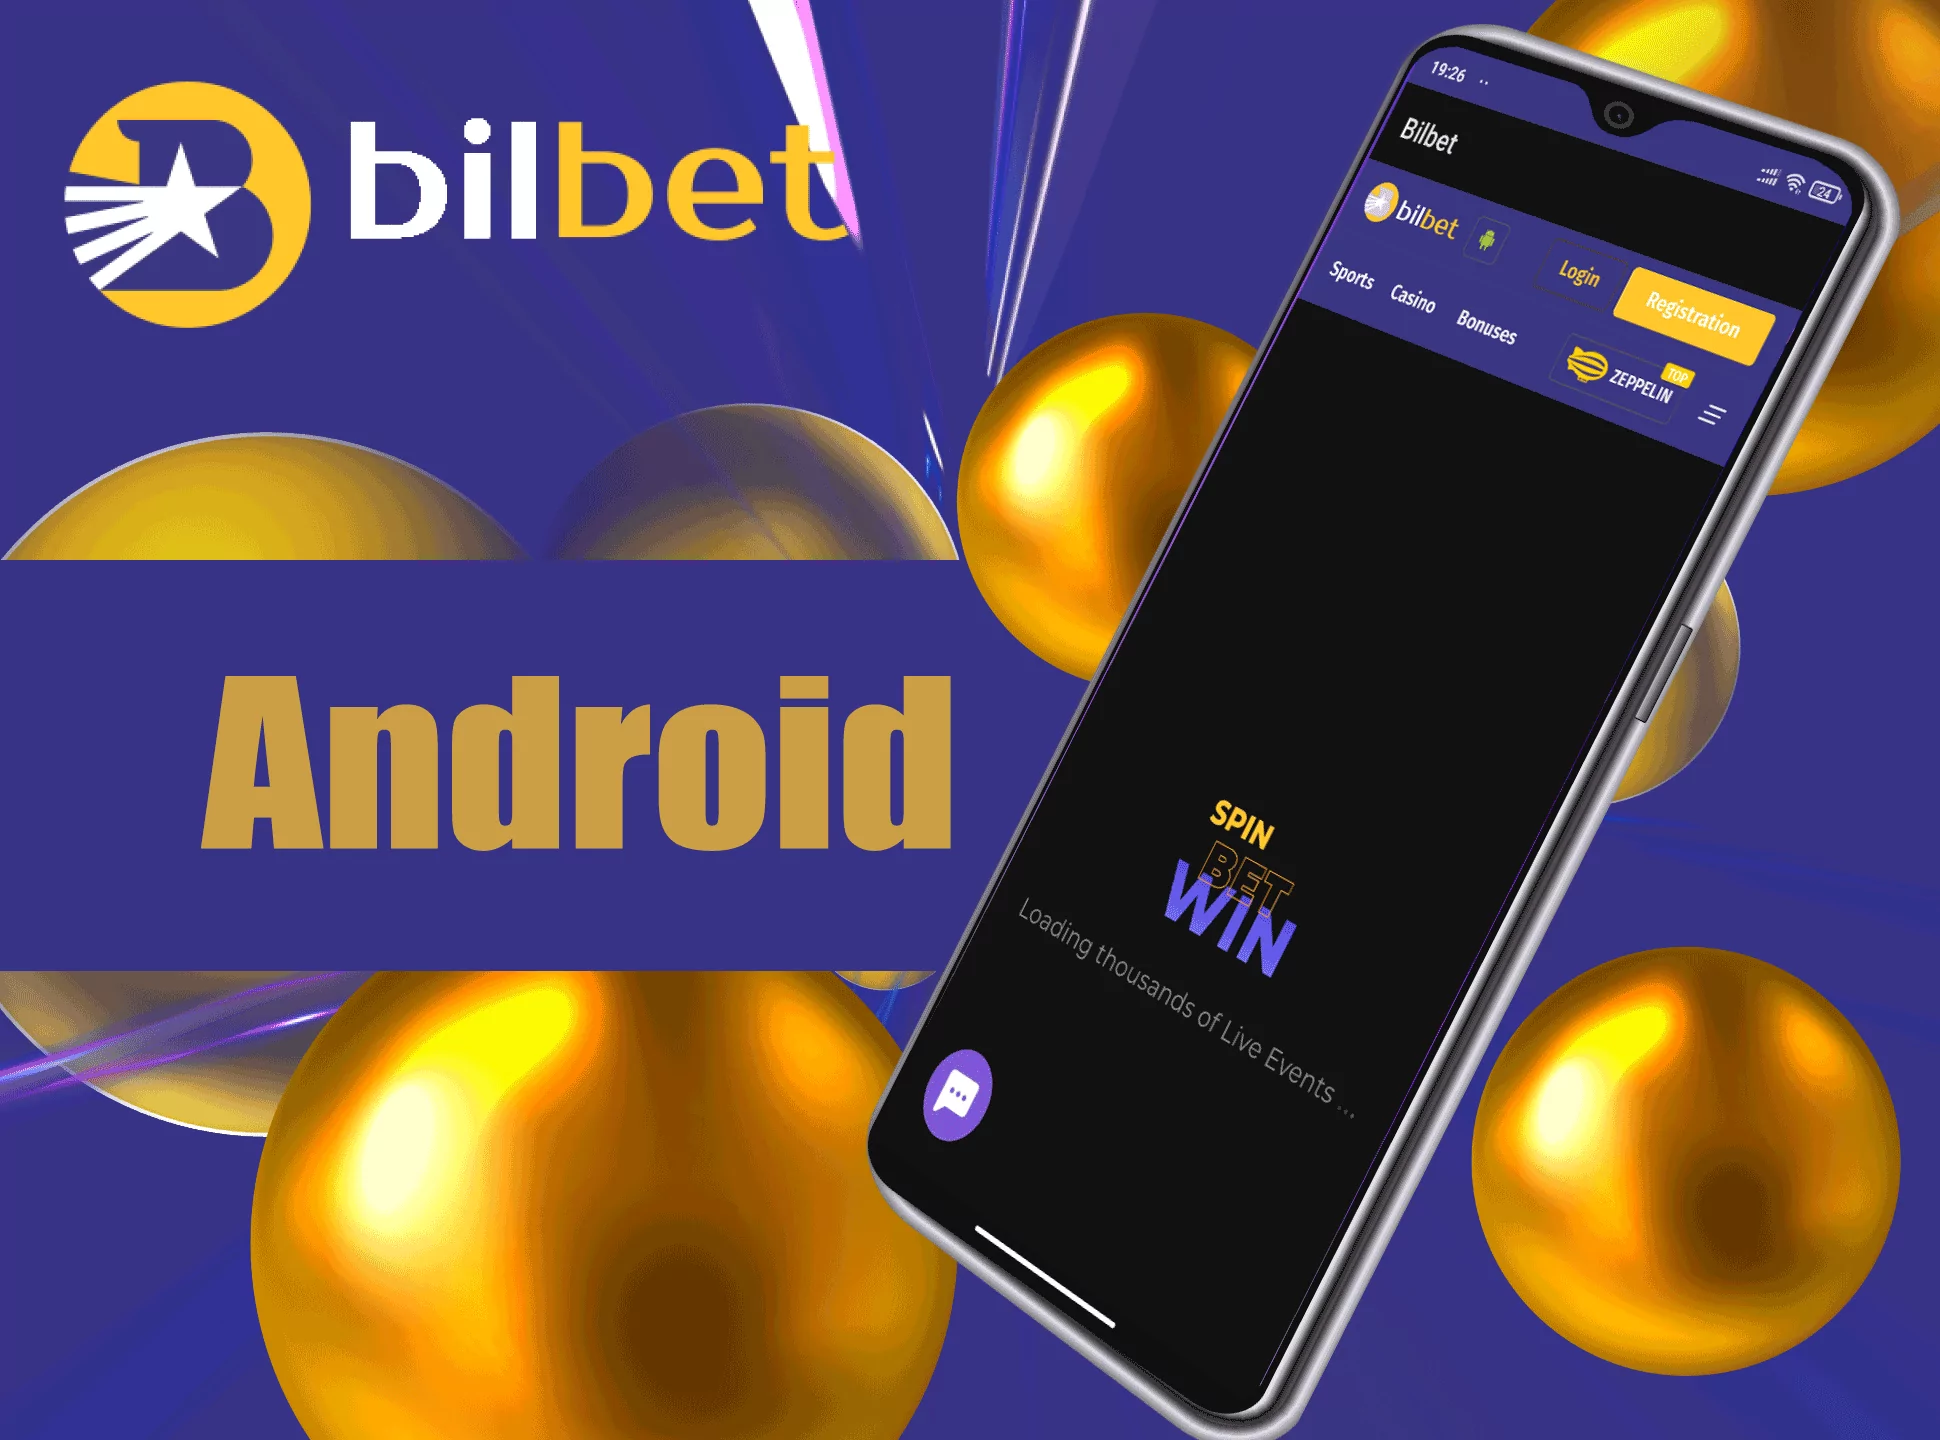 Open the Bilbet app and sign up.